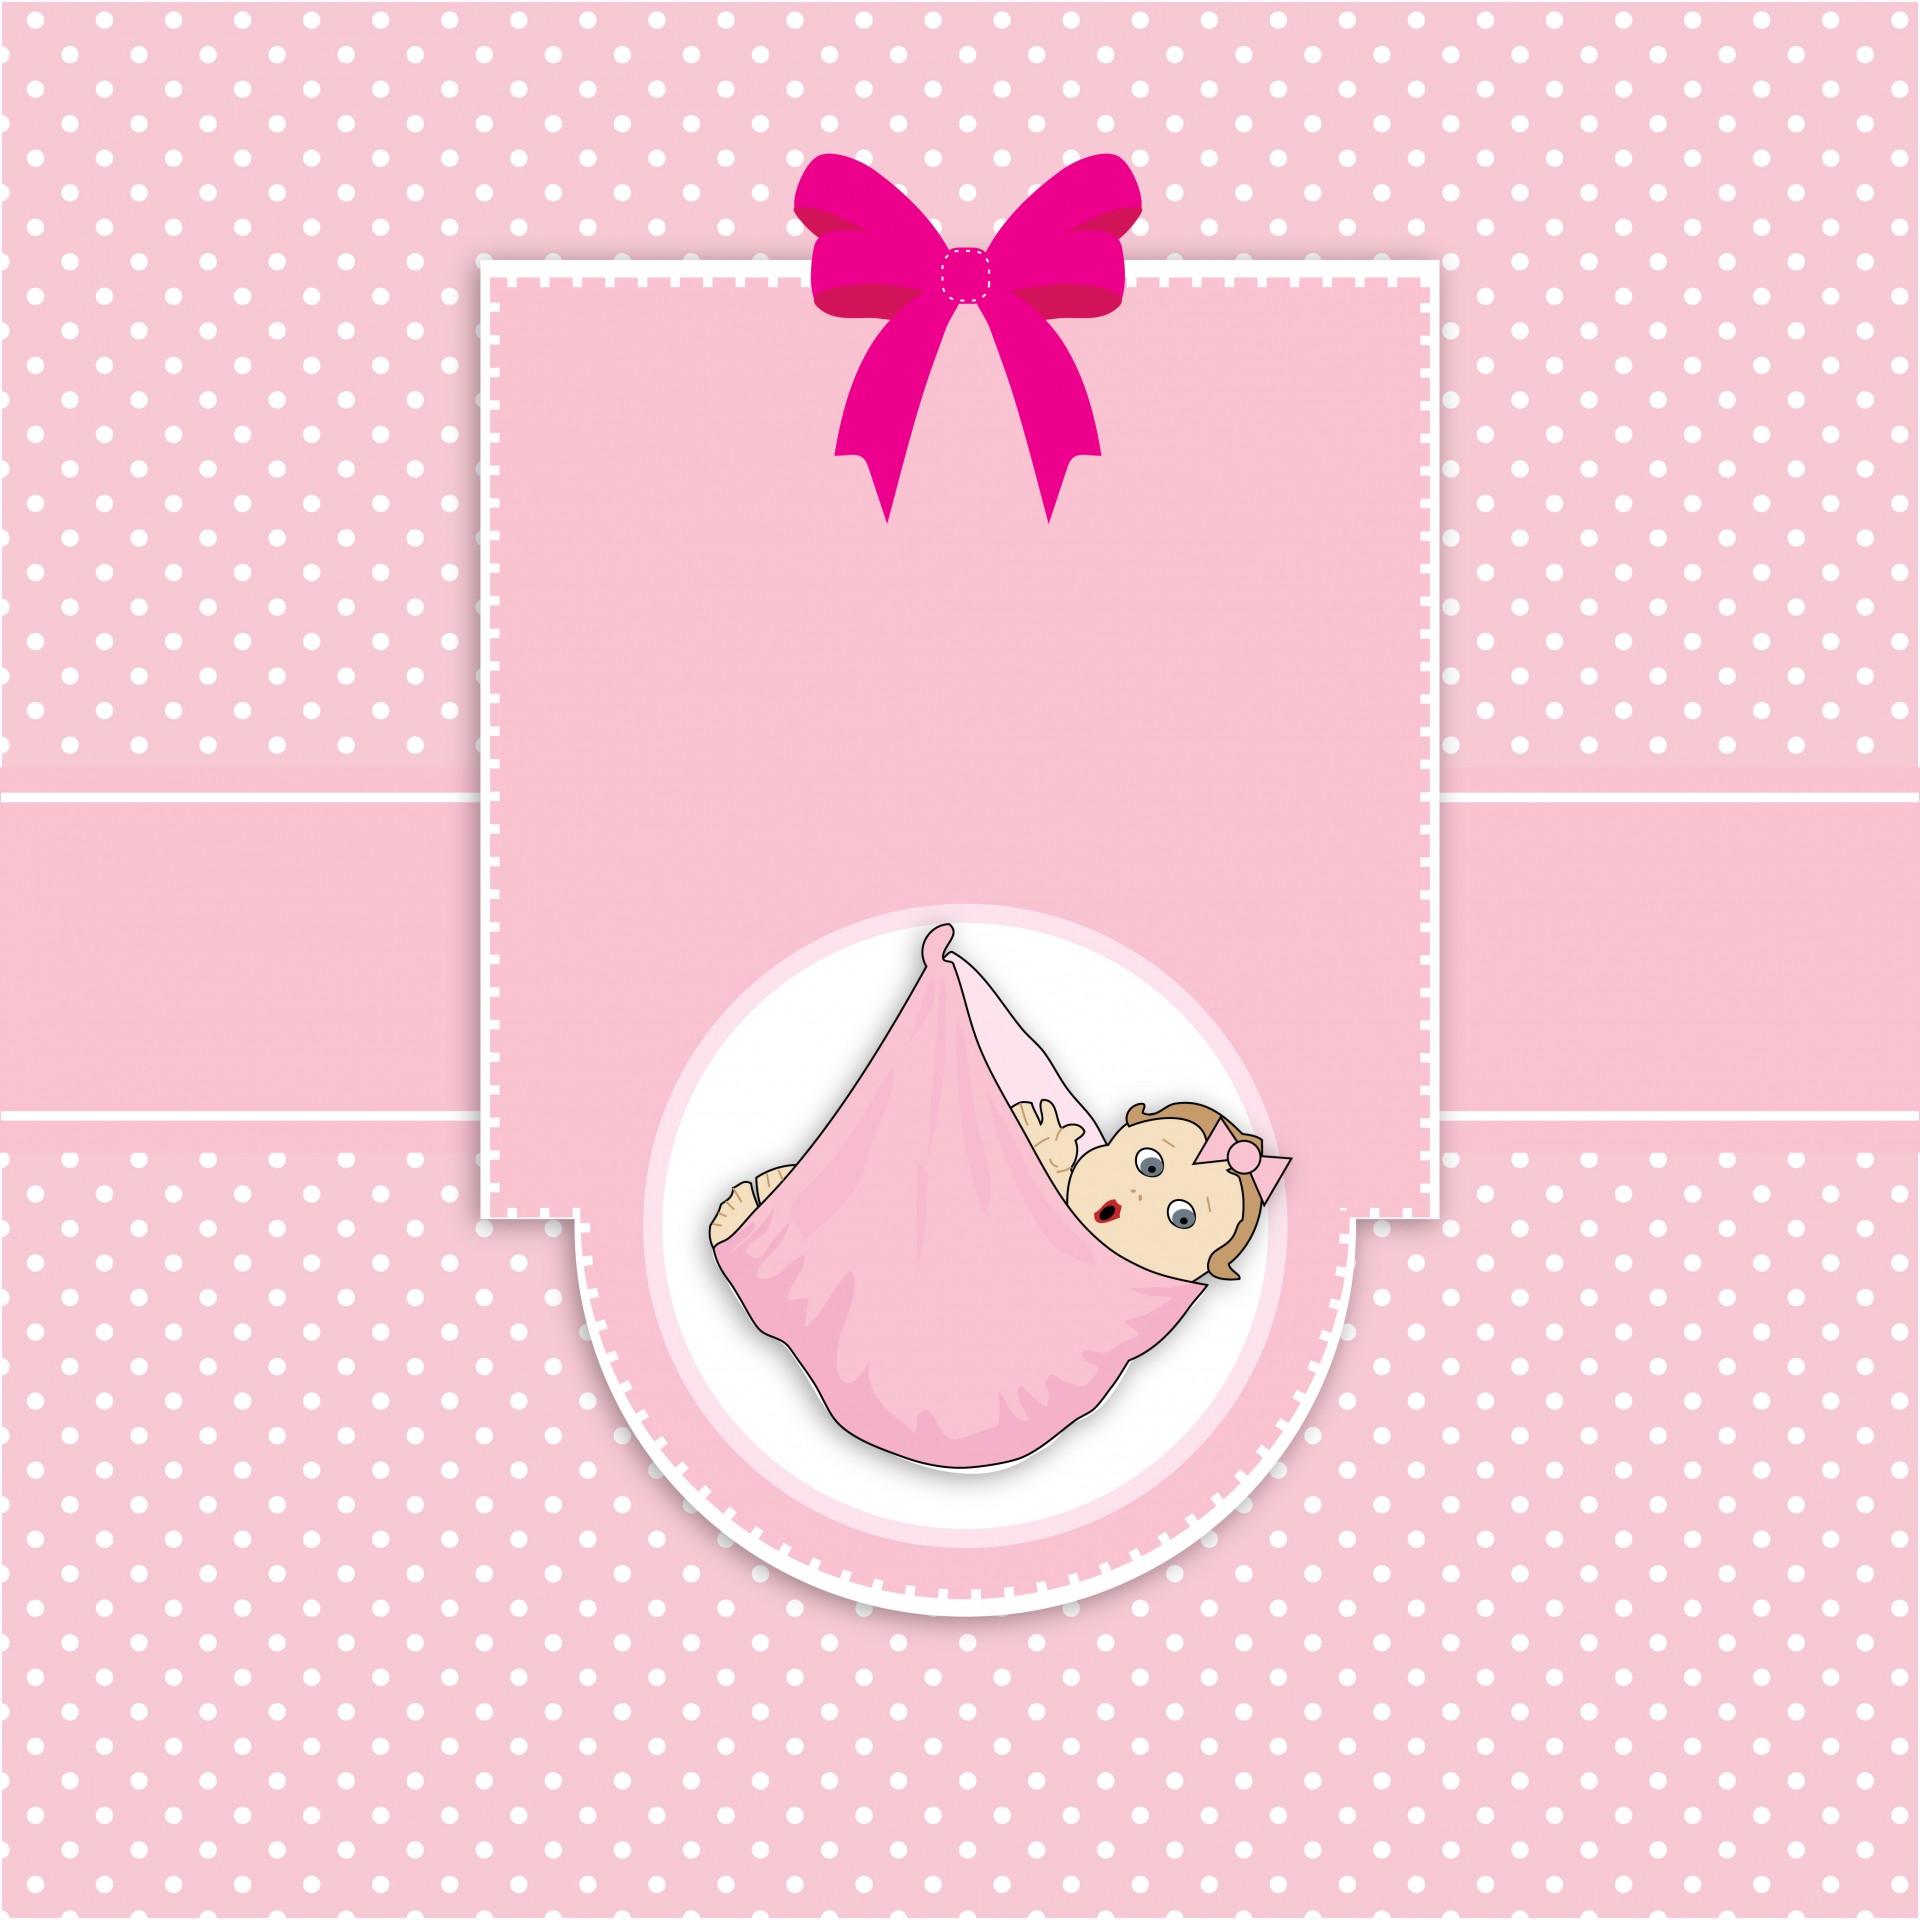 Alfa Img Showing Baby Shower Card Background